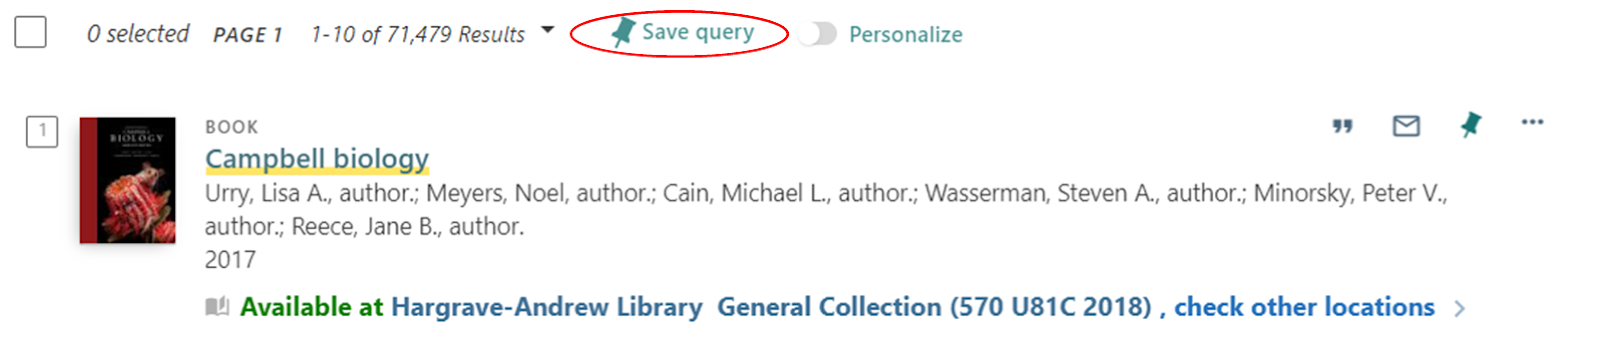 Search results showing a single brief item record and the Save query button circled